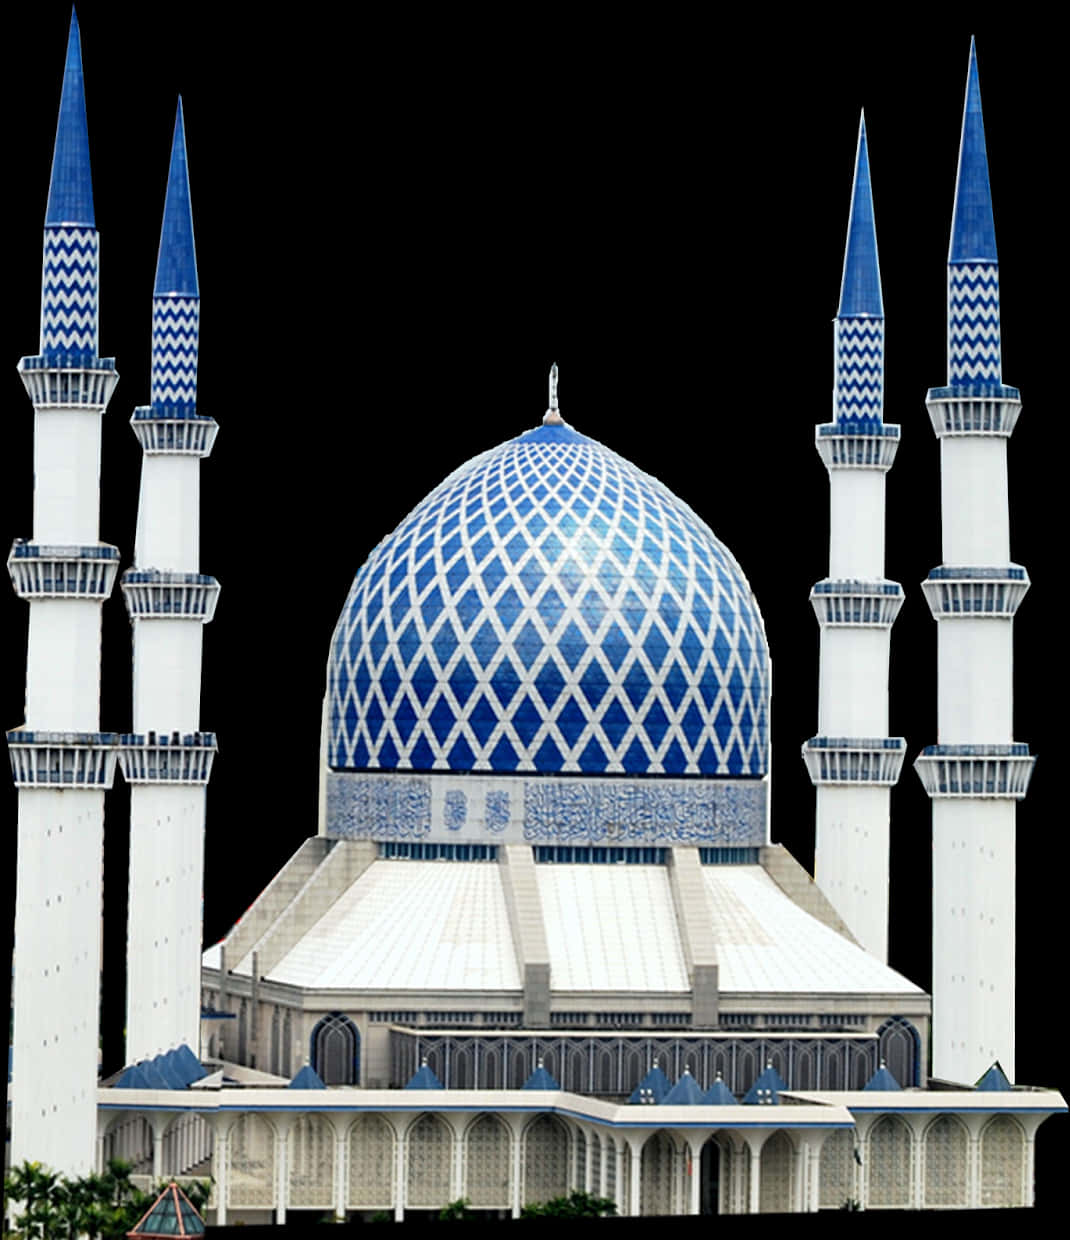 A Blue And White Building With Towers With Sultan Ahmed Mosque In The Background